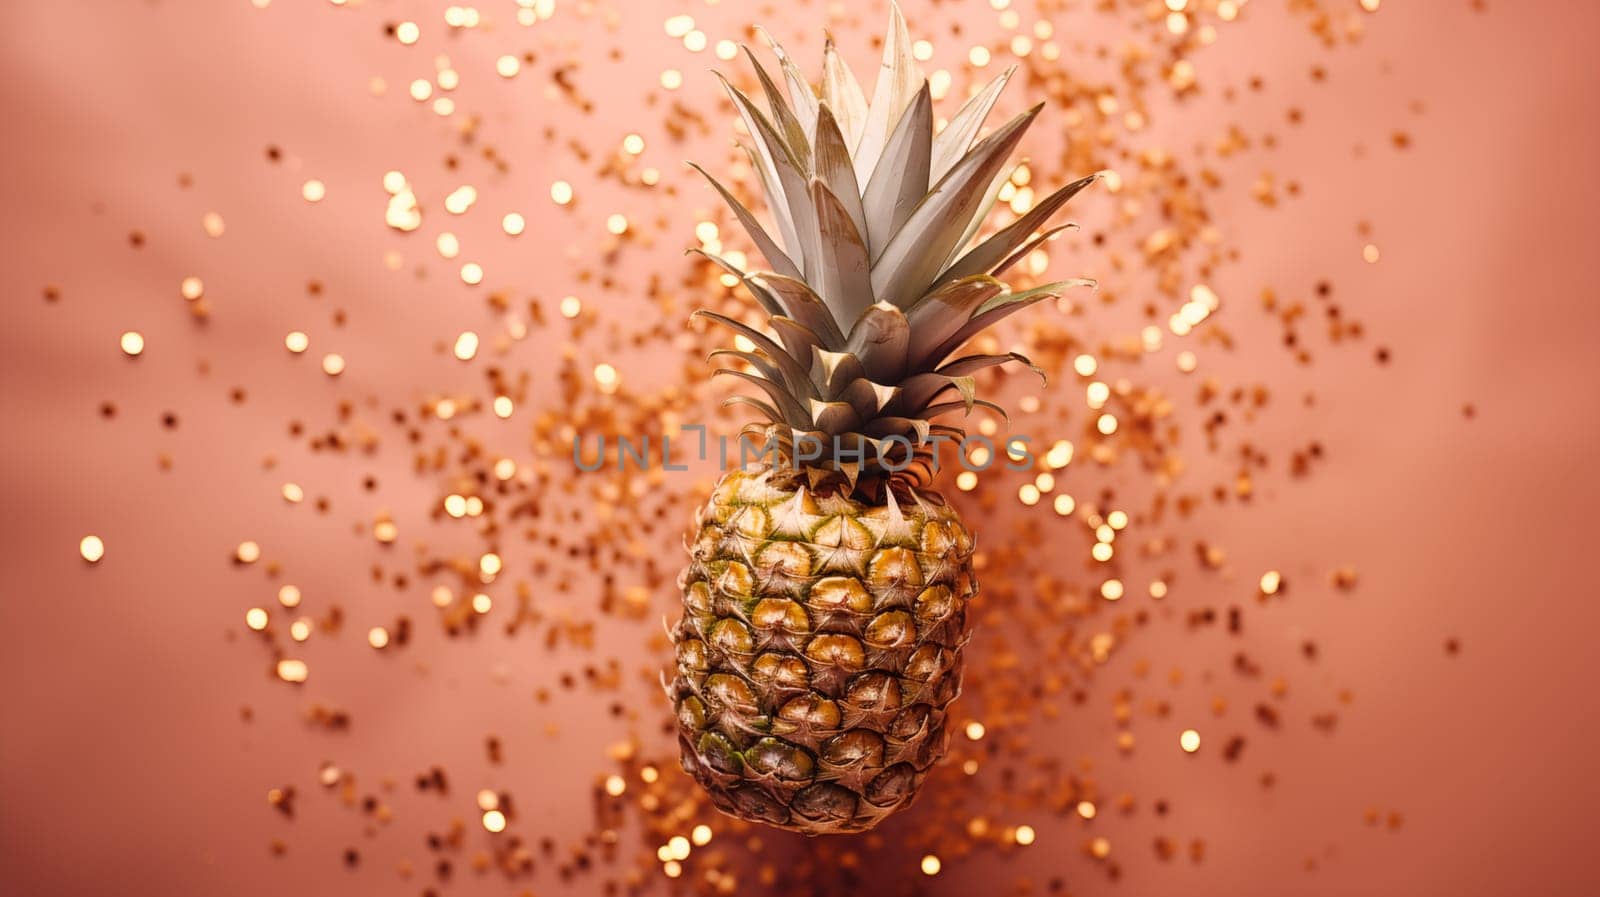 Pineapple is lying on a peach-colored background with golden confetti is scattered nearby by Zakharova